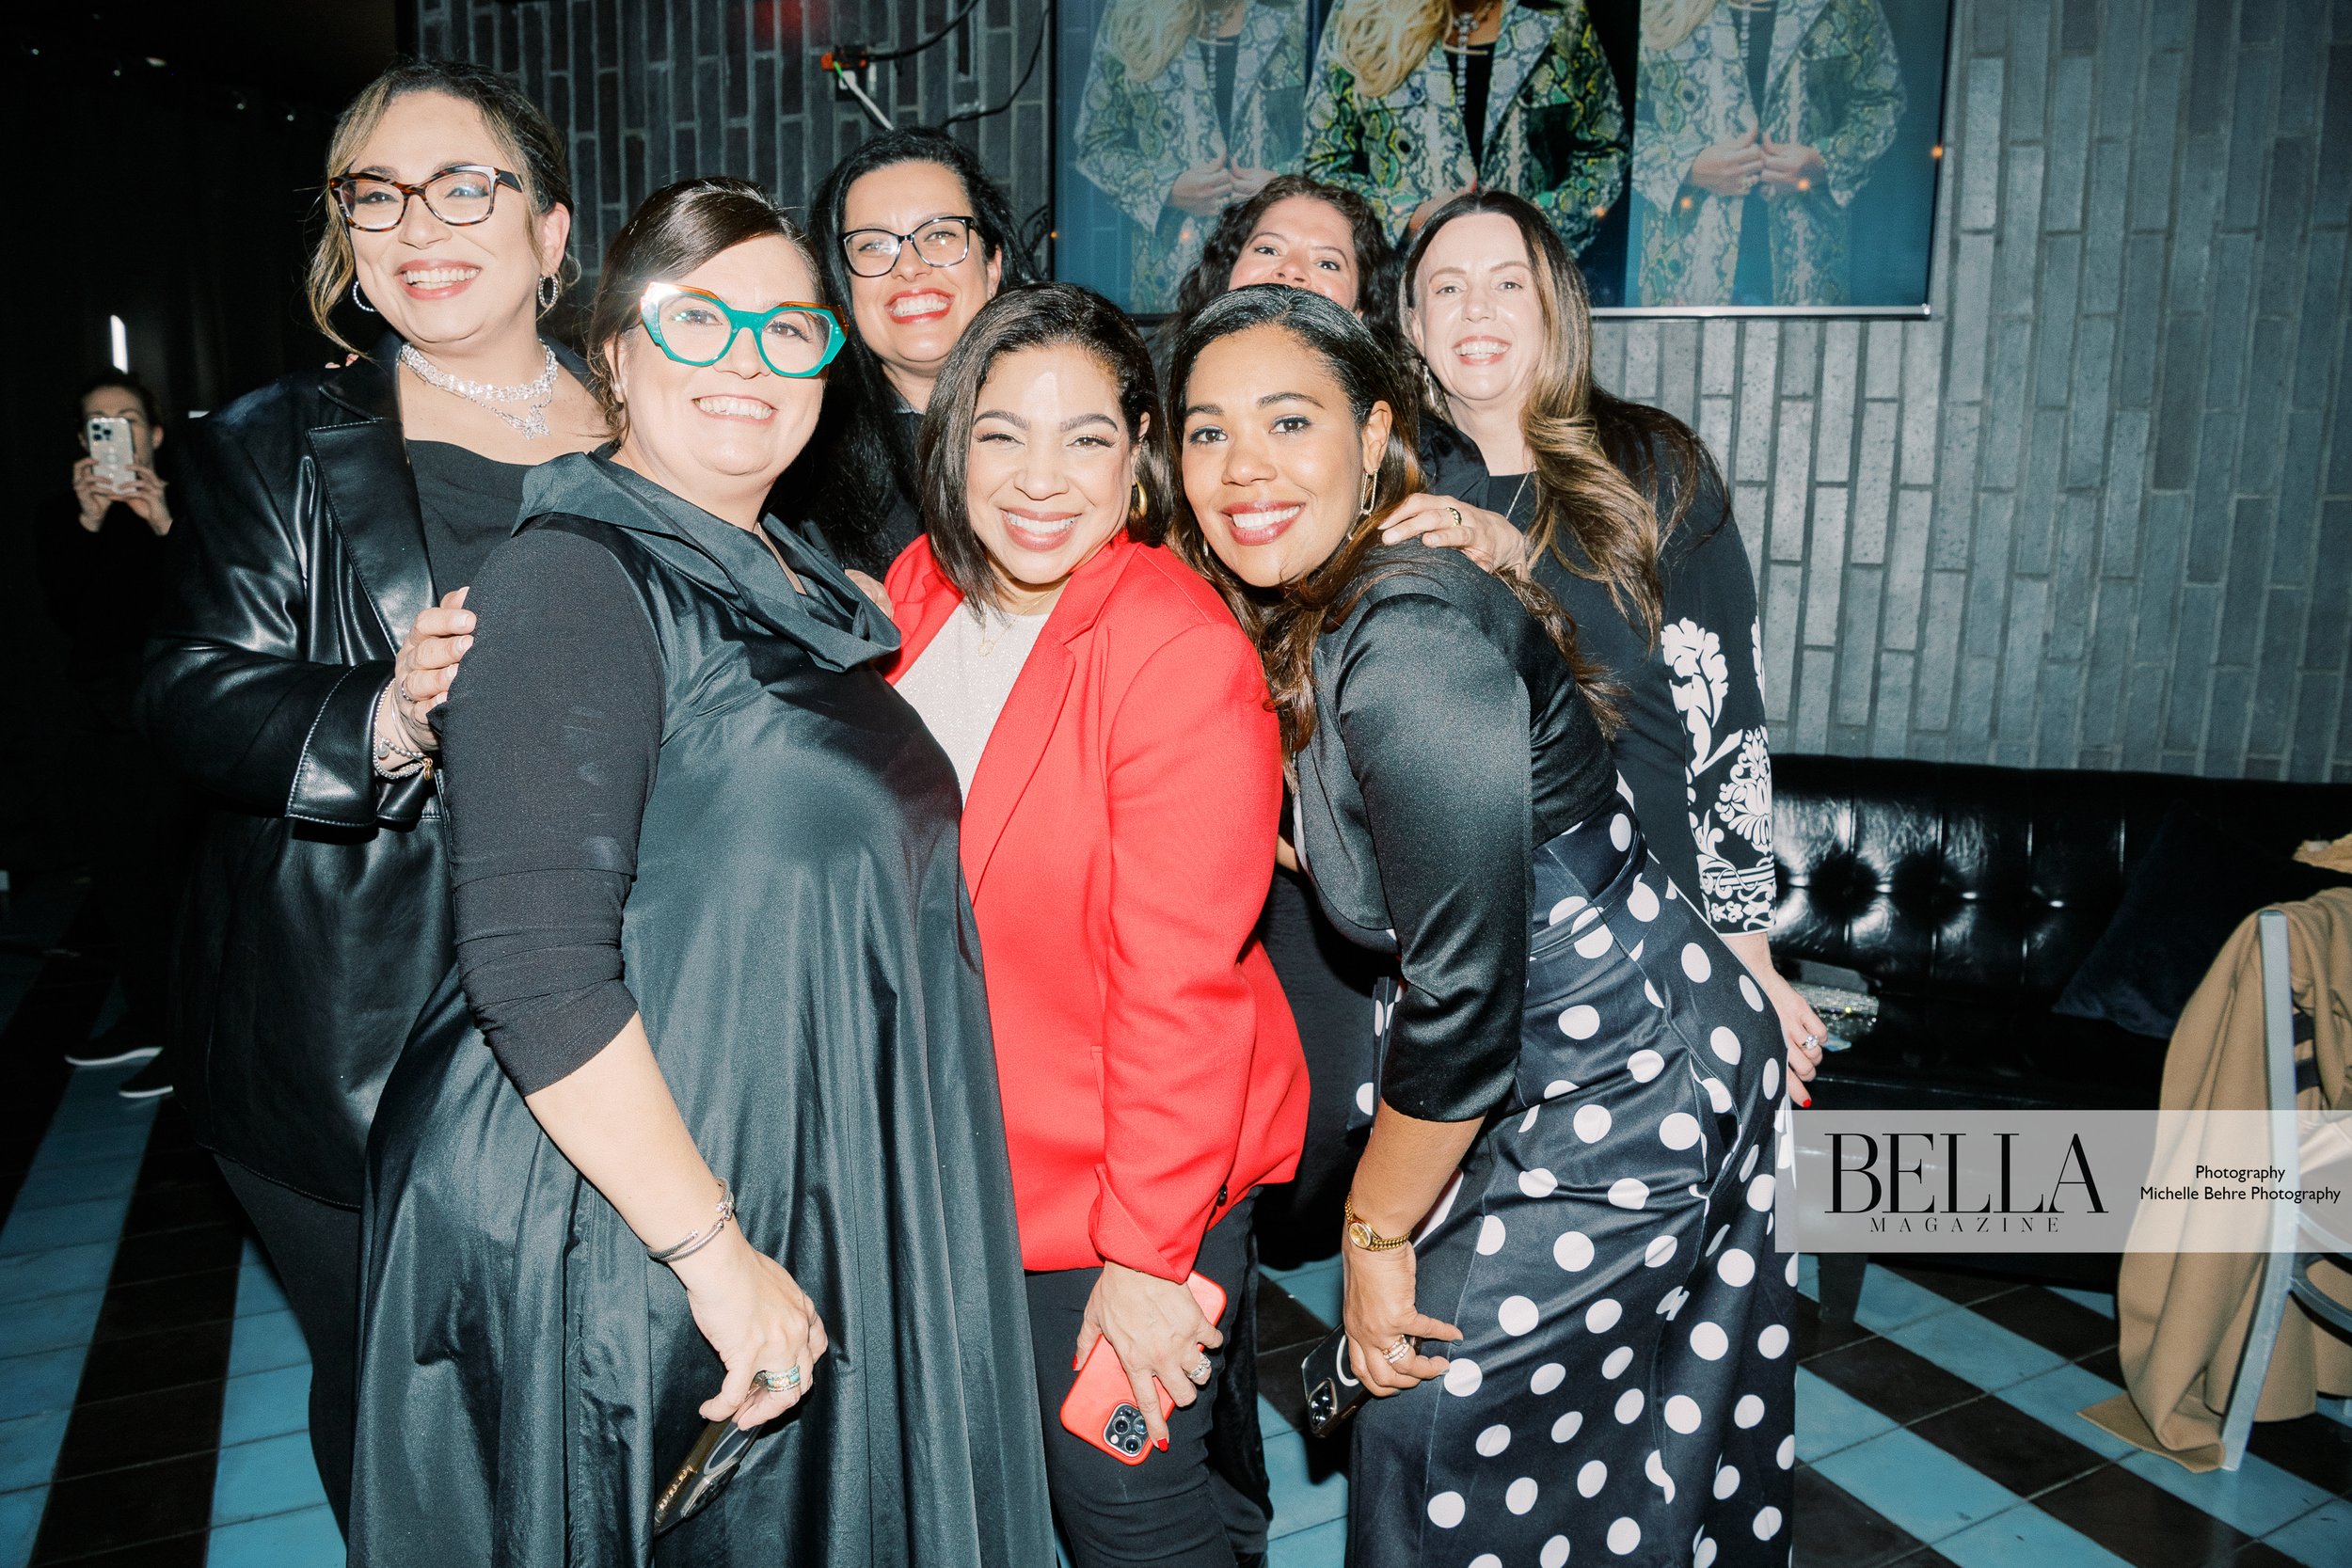 COVERPARTY2Michelle-Behre-Creative-Co-BELLA-Magazine-Women-of-Influence-Cover-Party-Burgerology-264.jpg